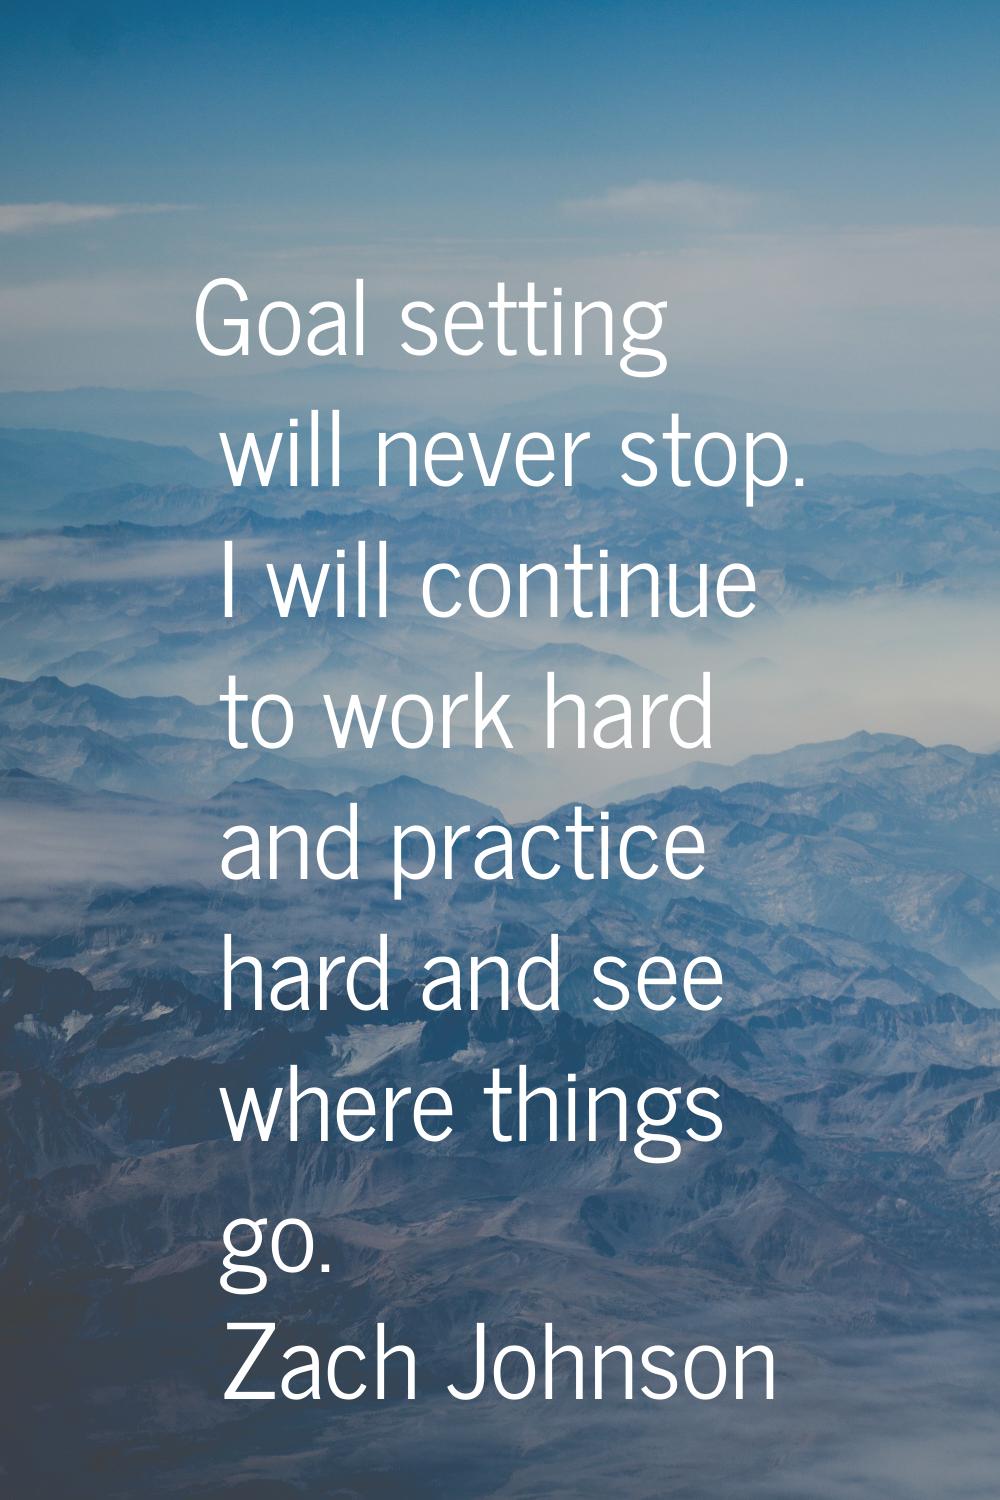 Goal setting will never stop. I will continue to work hard and practice hard and see where things g